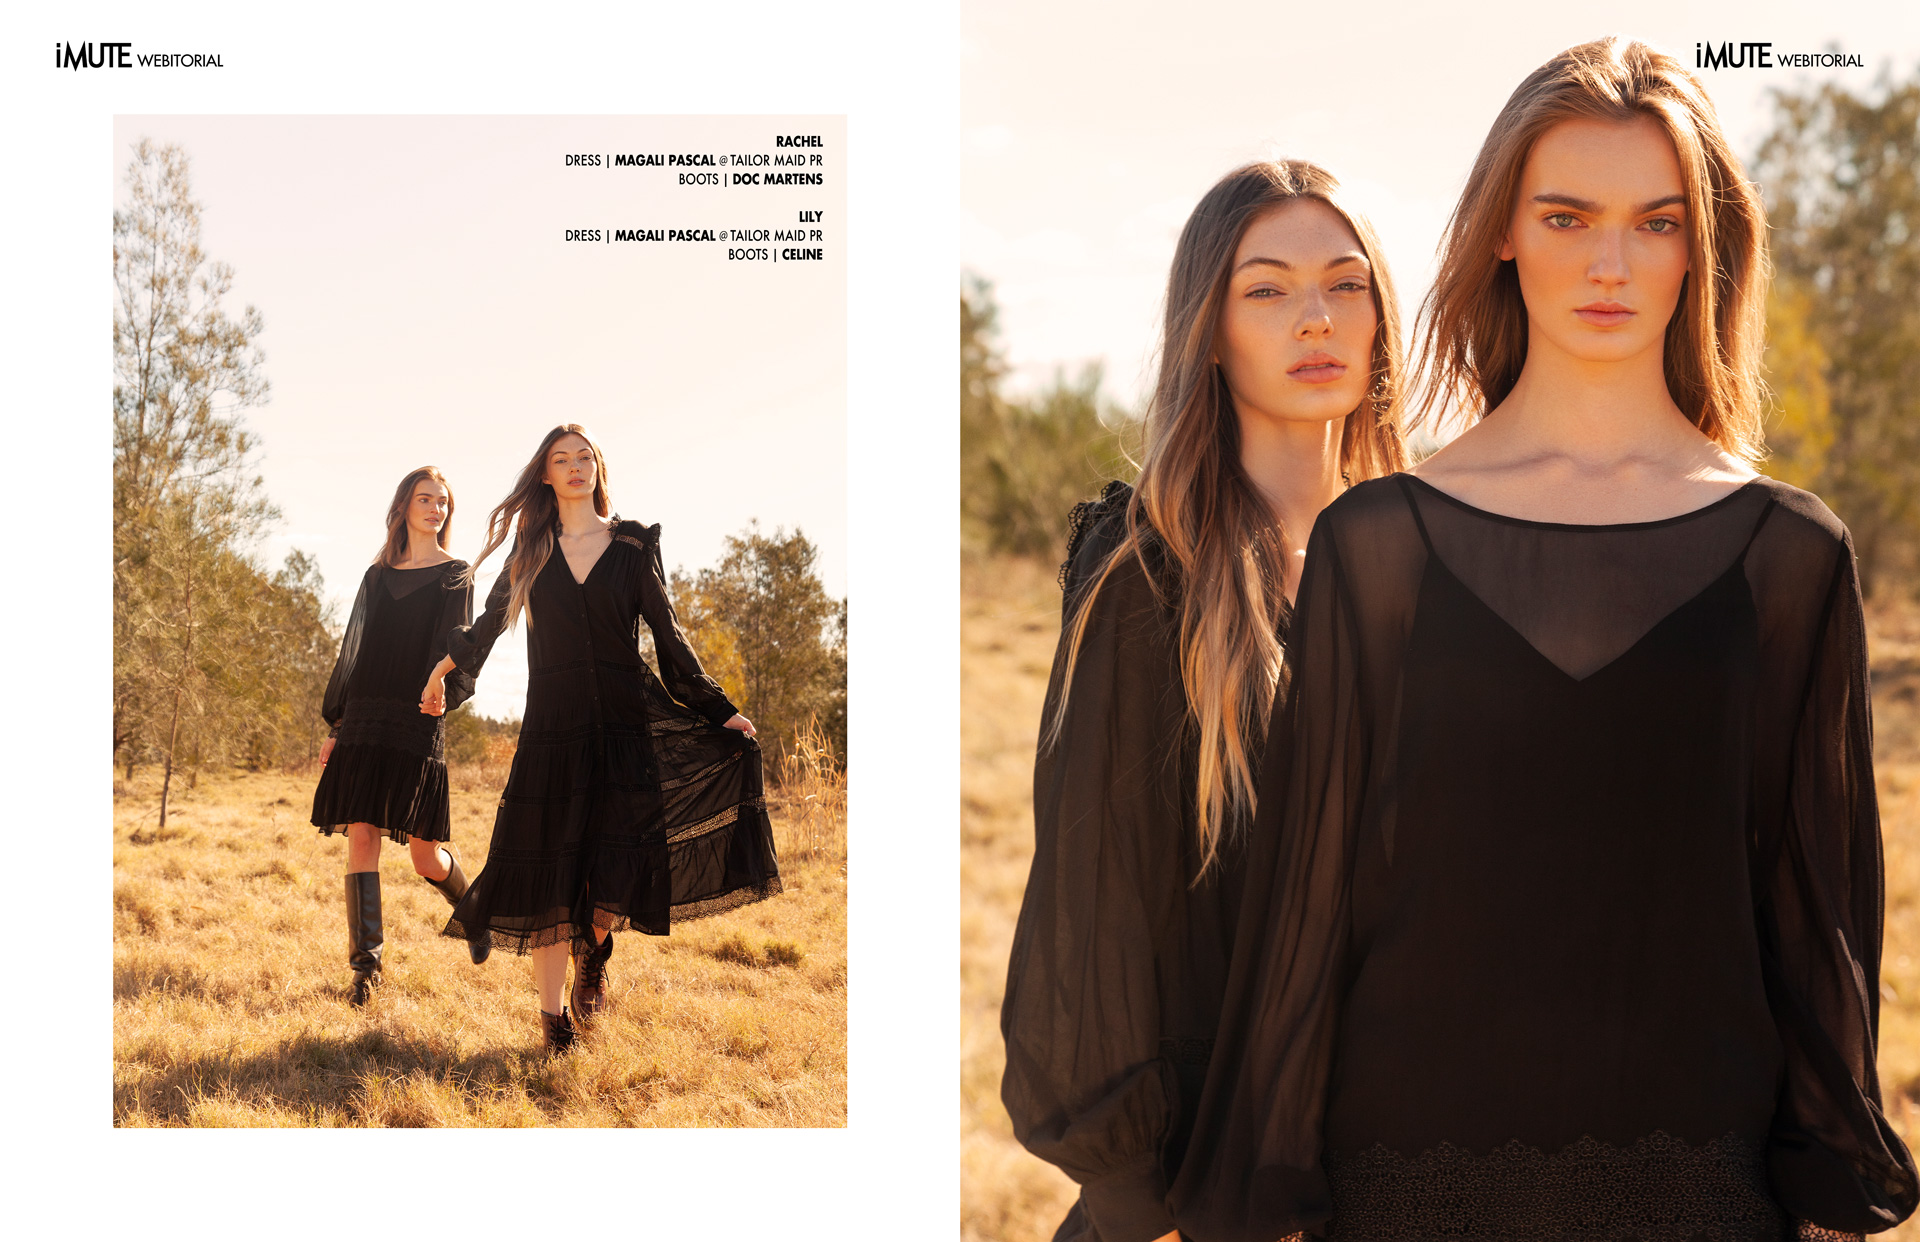 COME TOGETHER webitorial for iMute Magazine  PHOTOGRAPHER & STYLIST | JESS COLLINS MODELS | LILY BLUTCHER @ VIVIENS MODEL MGMT & RACHEL WOODALL @ BUSYMODELS MAKEUP & HAIR | ALARNA TAYLOR